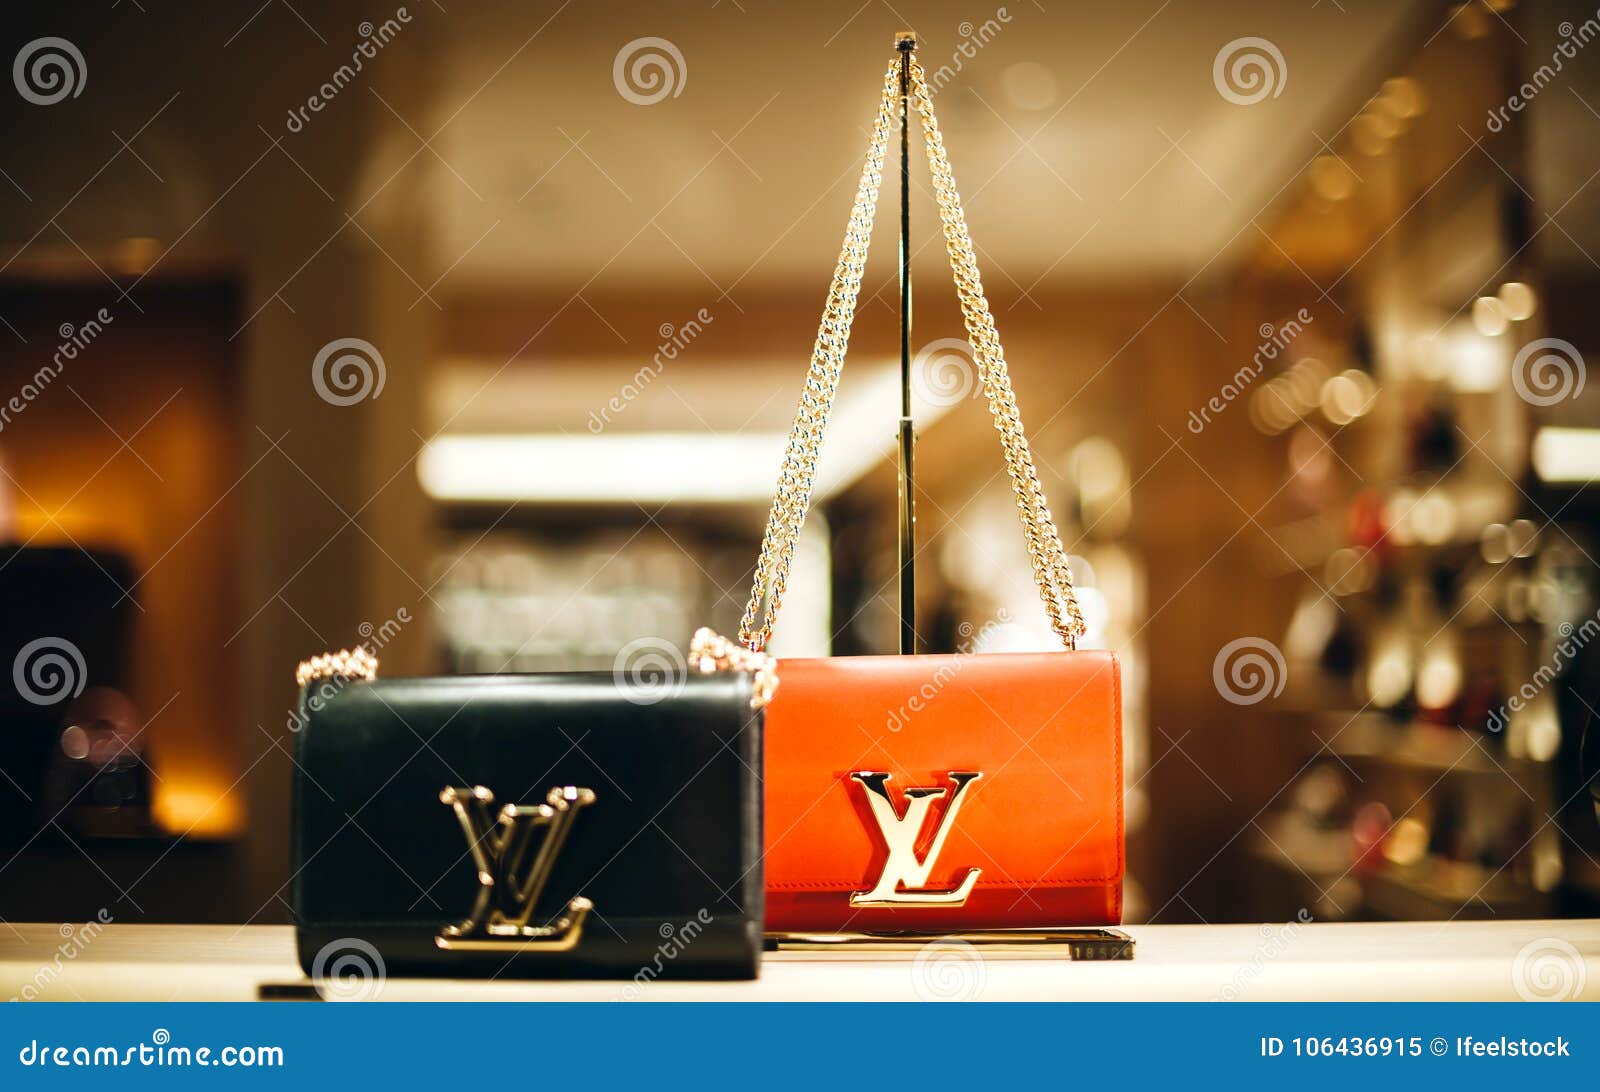 Luxury Leather Louis Vuitton LVMH Leather Bags Editorial Image